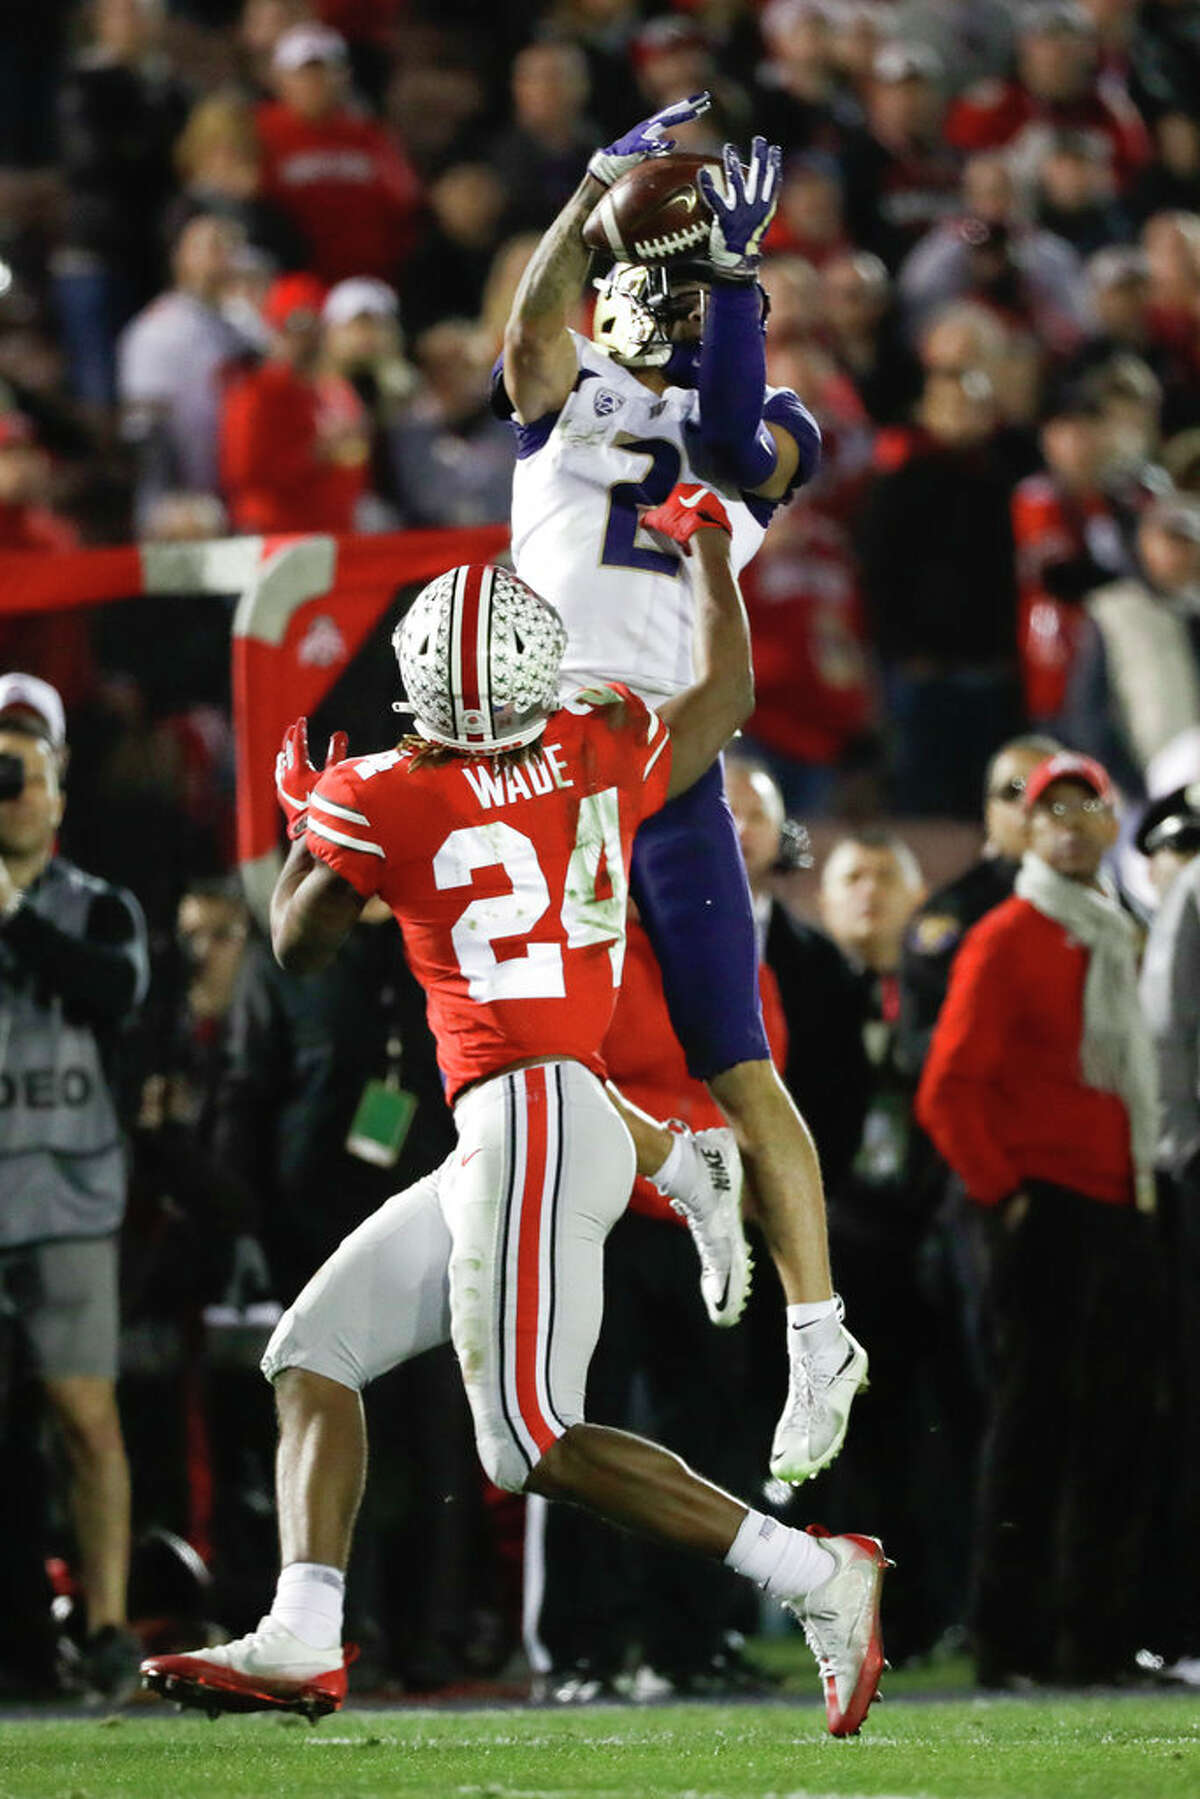 Washington wide receiver Aaron Fuller catches a pass over Ohio State cornerback Shaun Wade during the second half of the Rose Bowl NCAA college football game Tuesday, Jan. 1, 2019, in Pasadena, Calif. (AP Photo/Jae C. Hong)